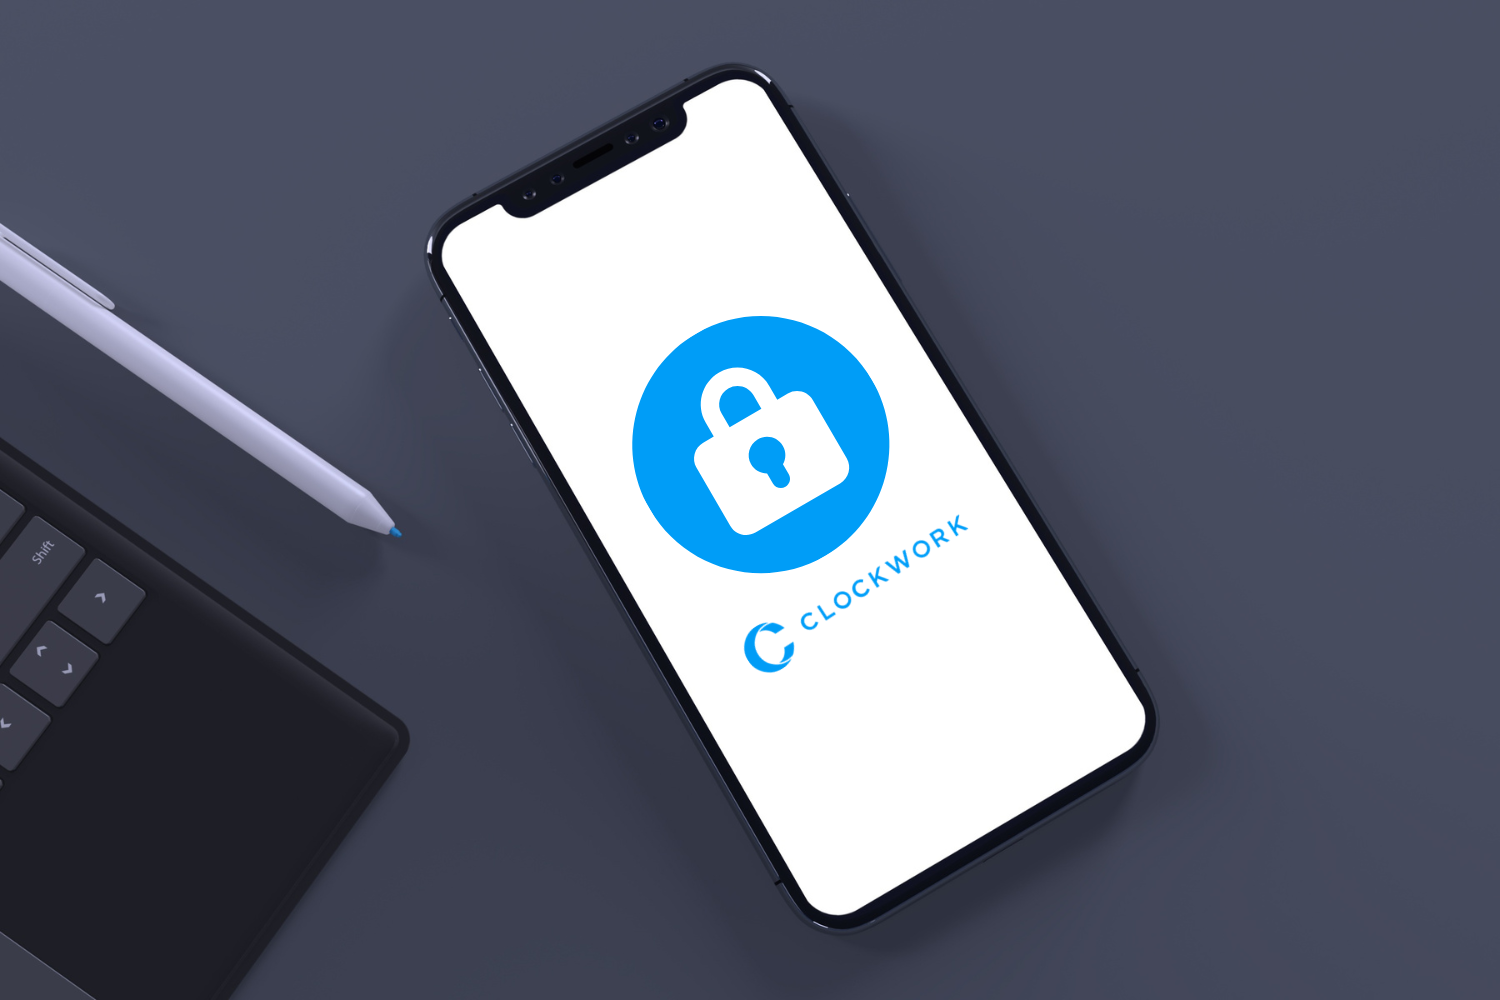 CWR Secure Mobile